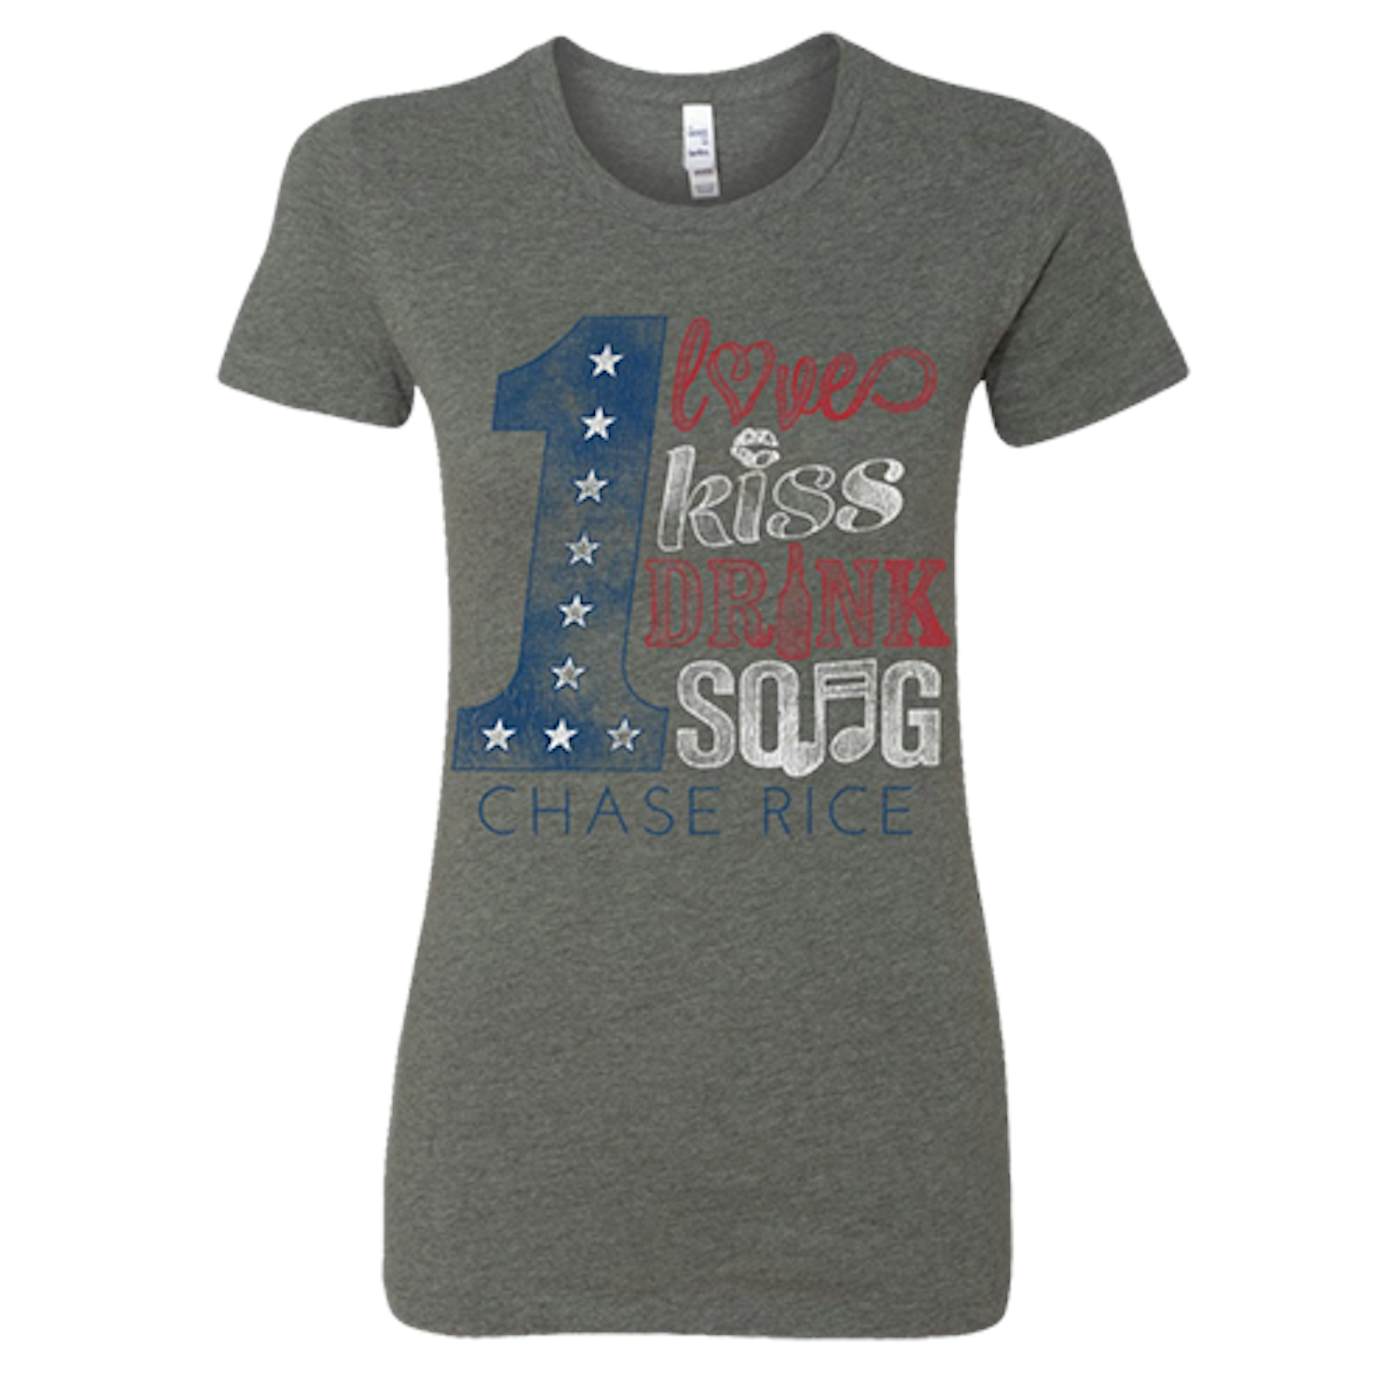 Chase Rice Ladies One Love, One Drank, One Song Tee